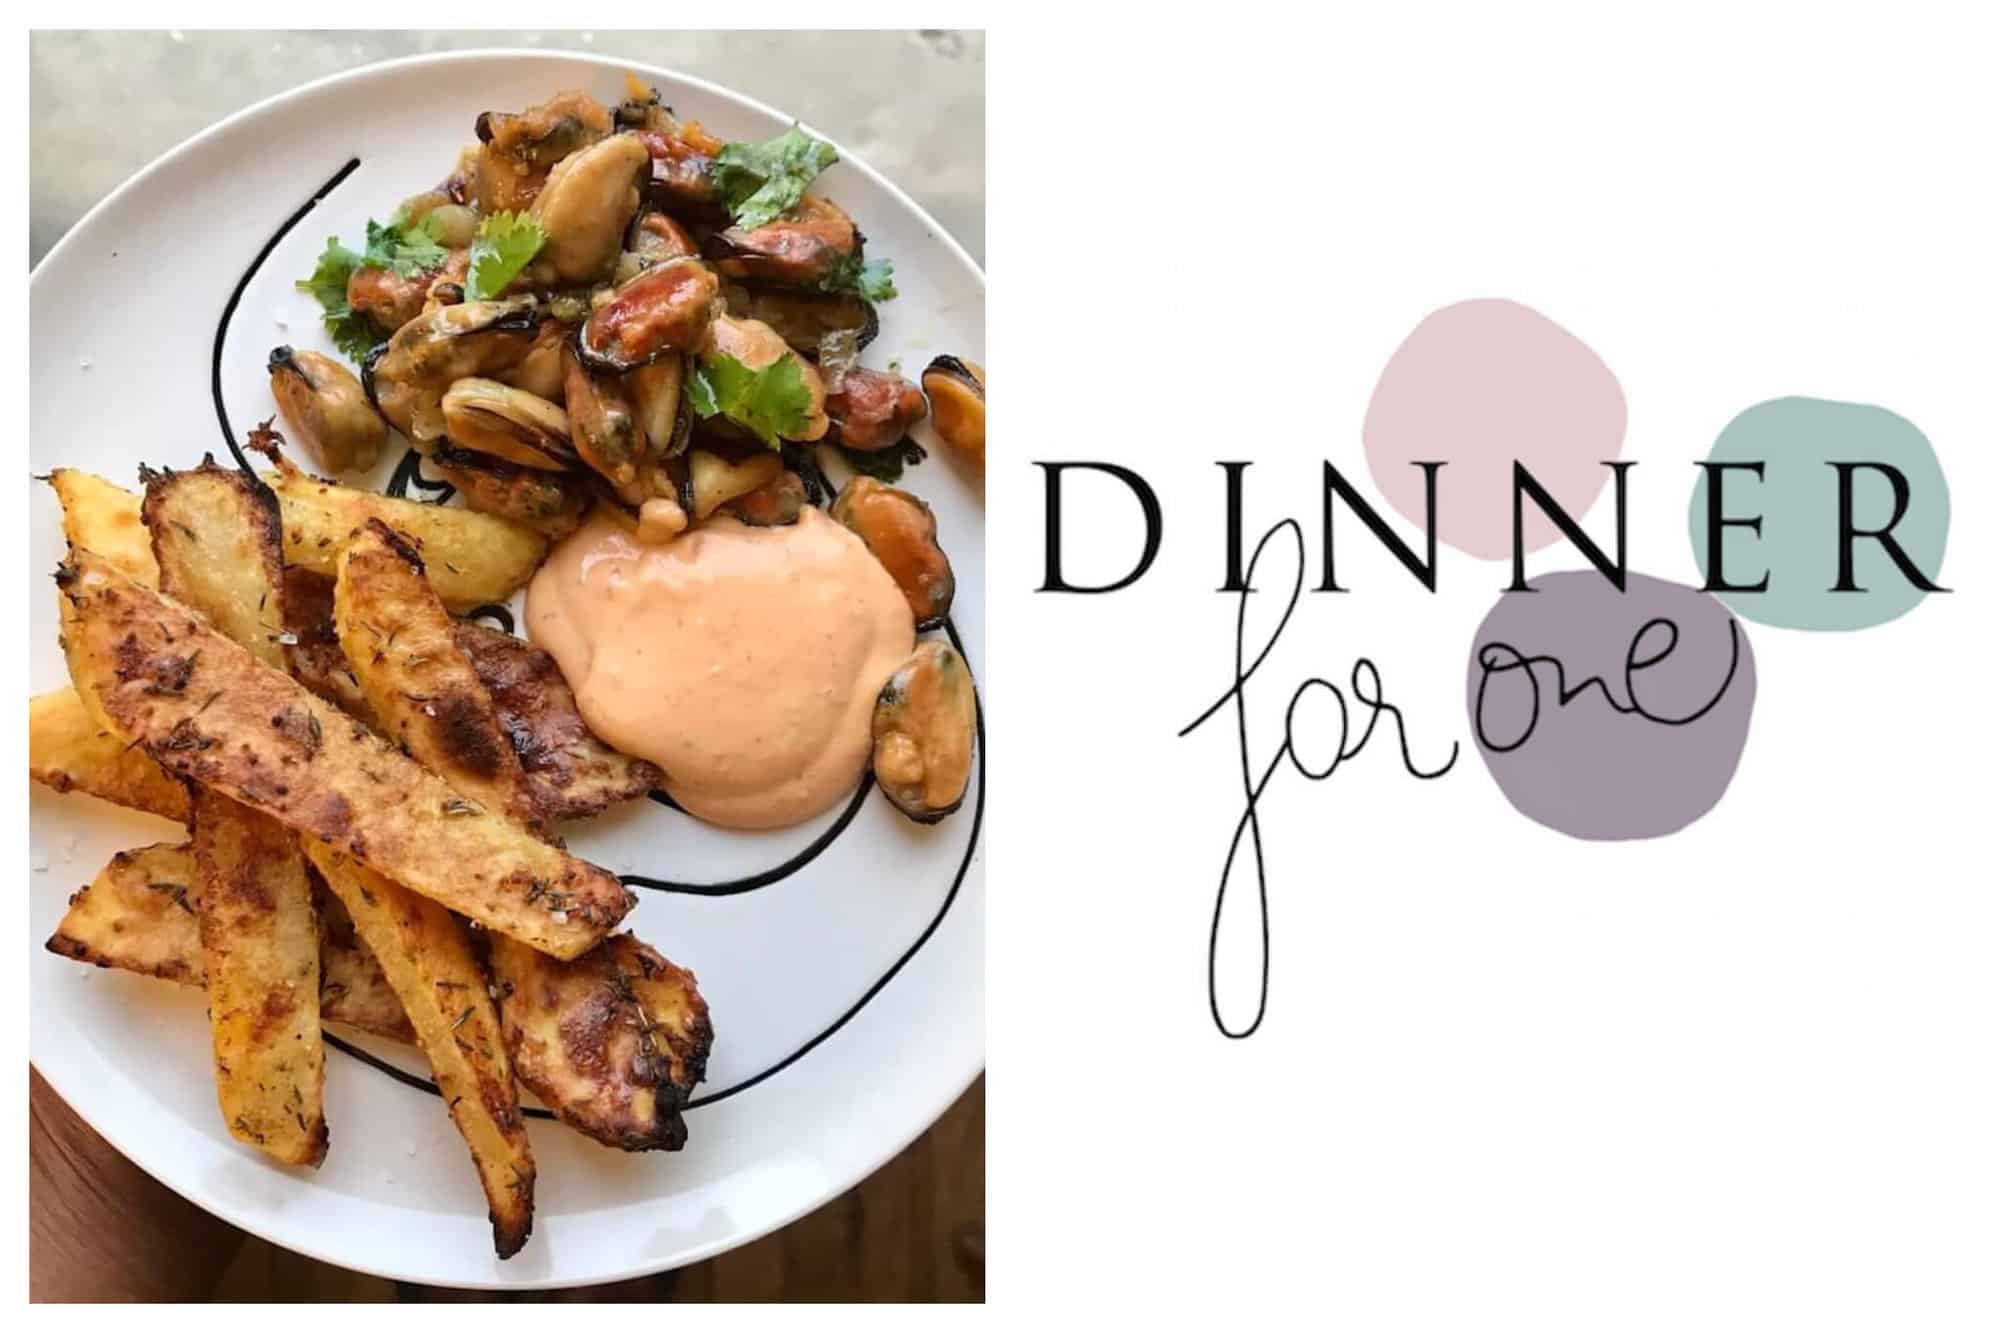 Left: An overhead shot of a plate of moules-frites, with the fries to the left, the muscles (moules) to the right and a spicy mayonnaise sauce in the middle, Right: The Dinner For One ppodcast logo, with purple, pink and blue dots in the background, and the text "Dinner For One" laid on top.